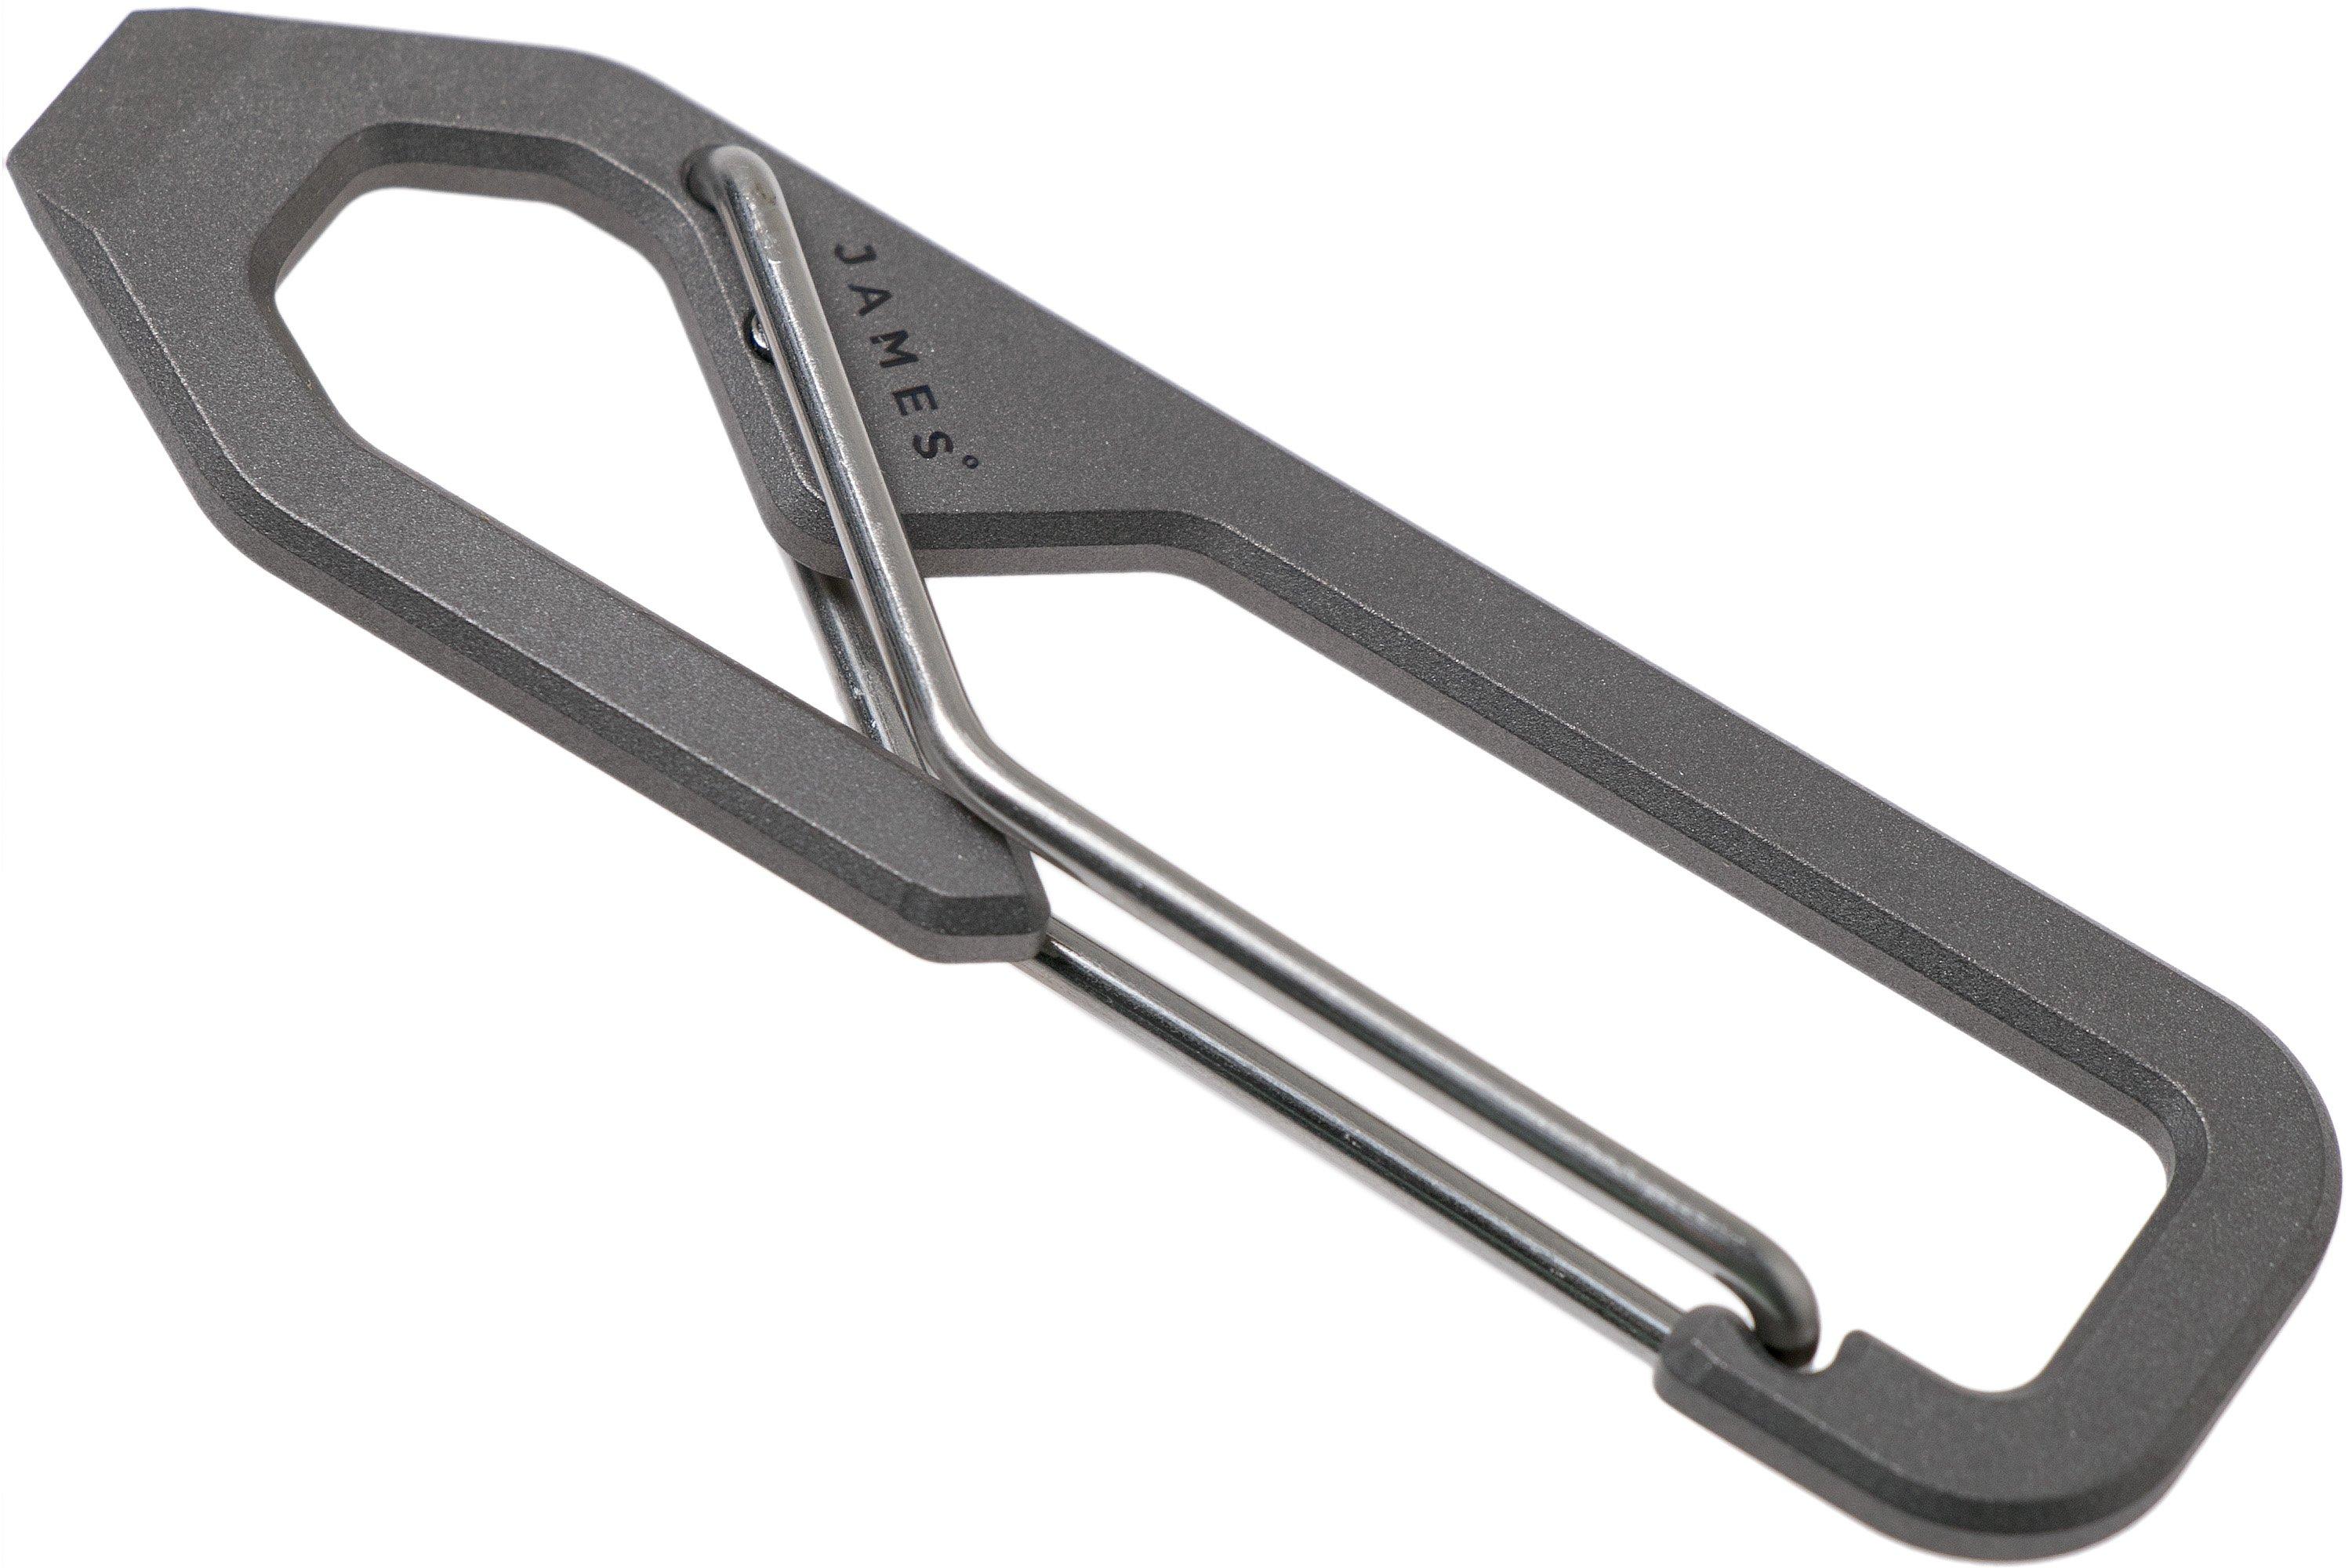 The James Brand Holcombe Black Stainless, carabiner